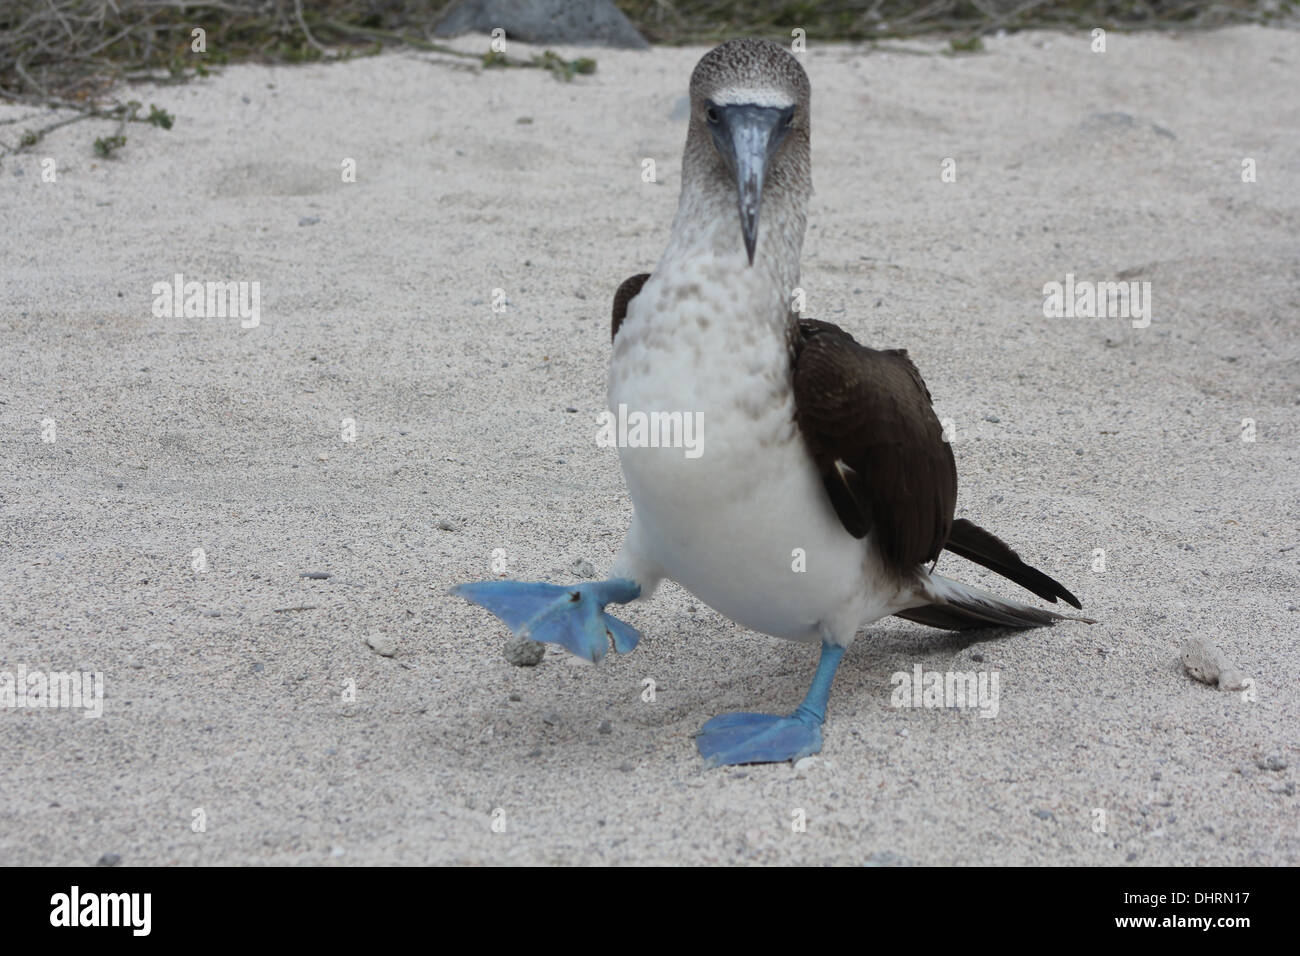 Blue Footed Booby (Sula nebouxii) passeggiate nelle isole Galapagos Foto Stock